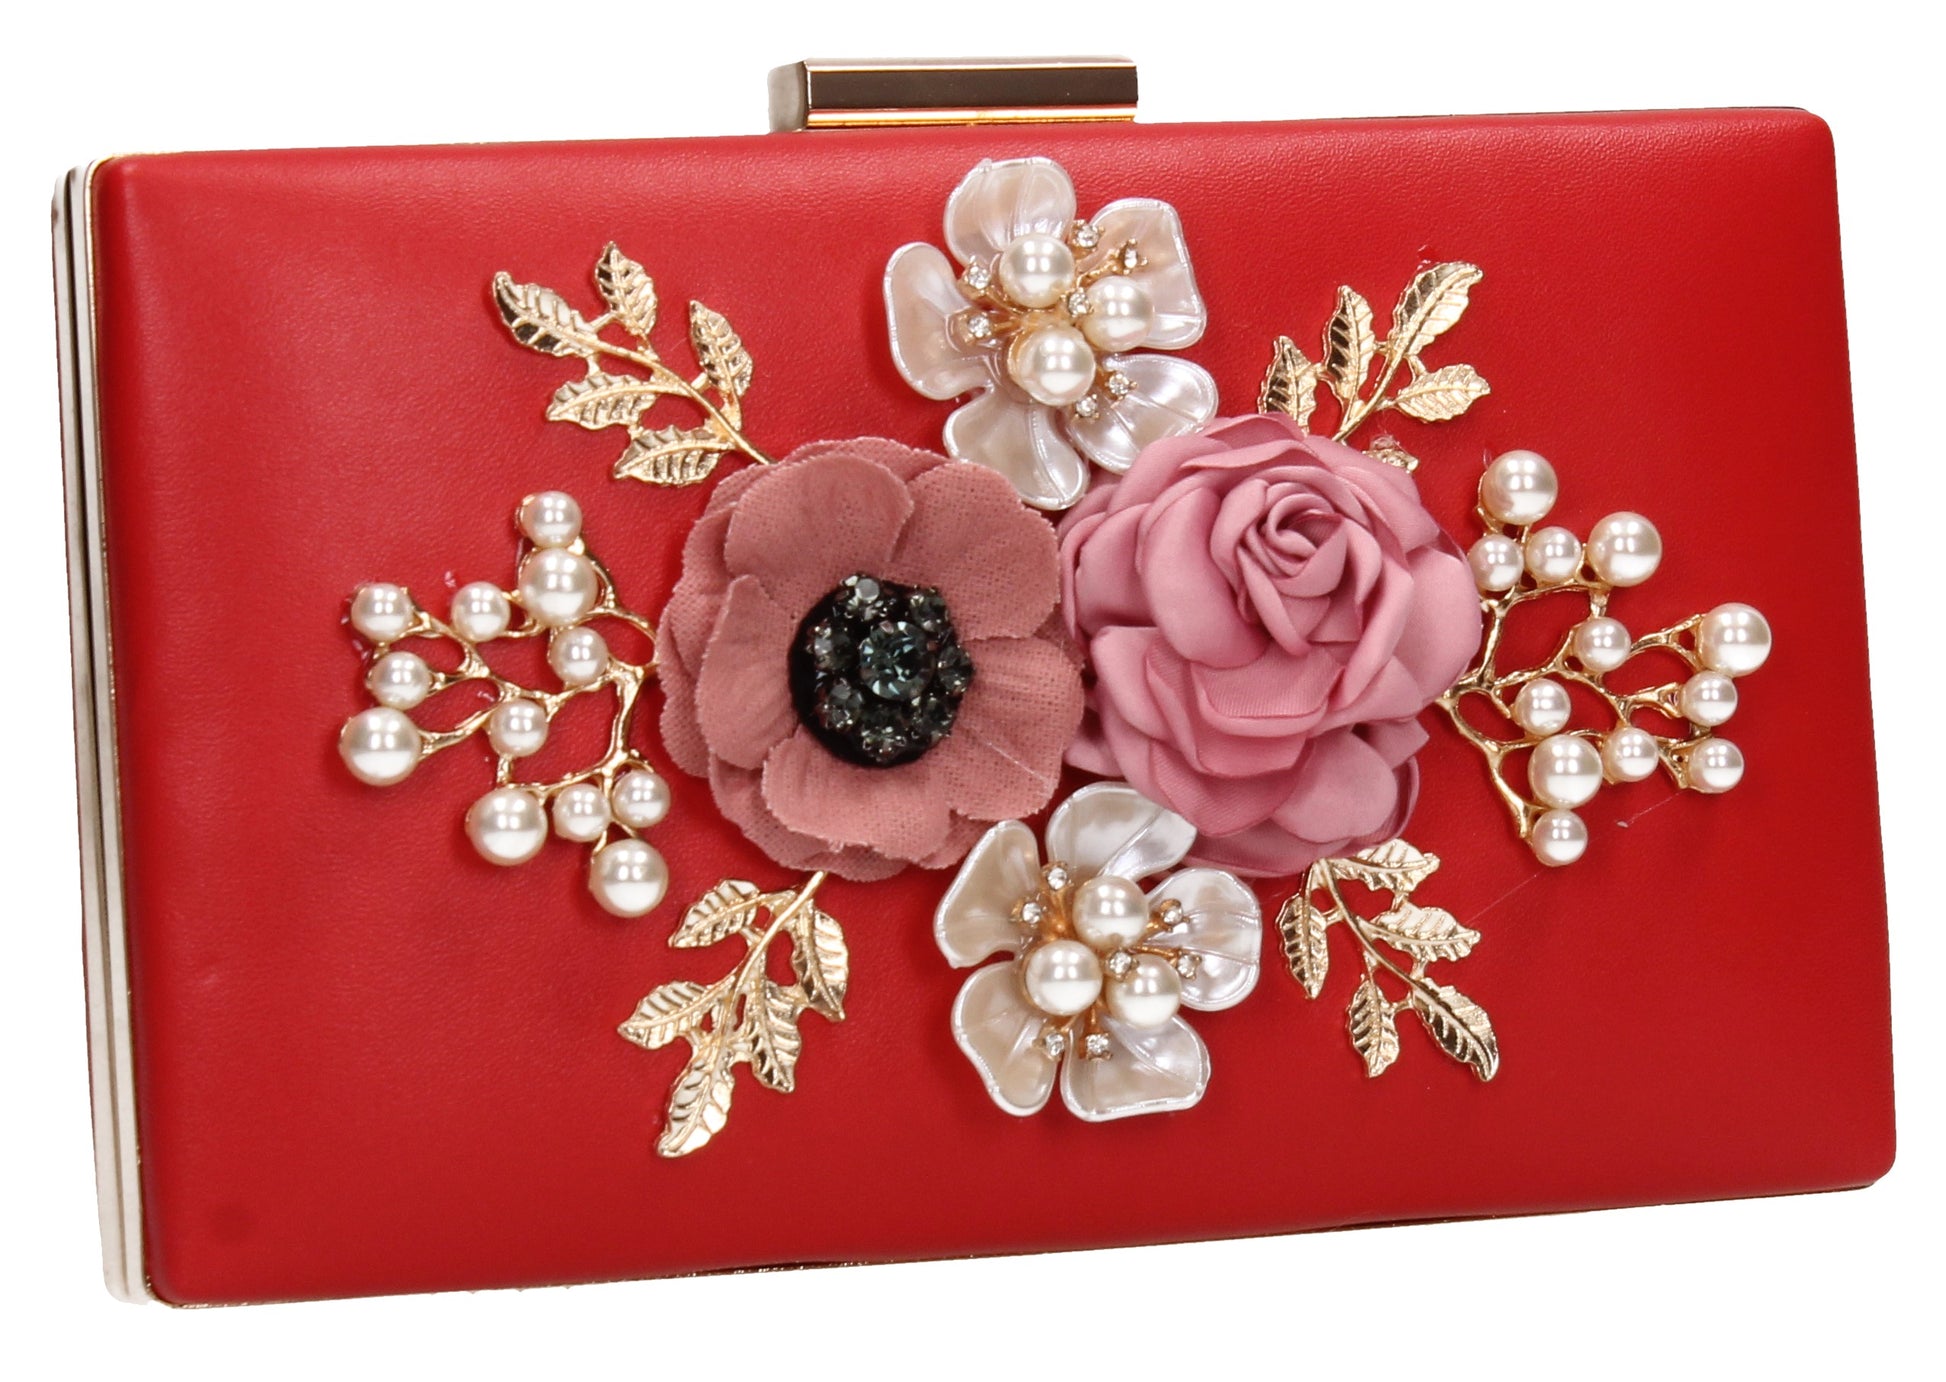 SWANKYSWANS Valery Floral Detail Clutch Bag Red Cute Cheap Clutch Bag For Weddings School and Work